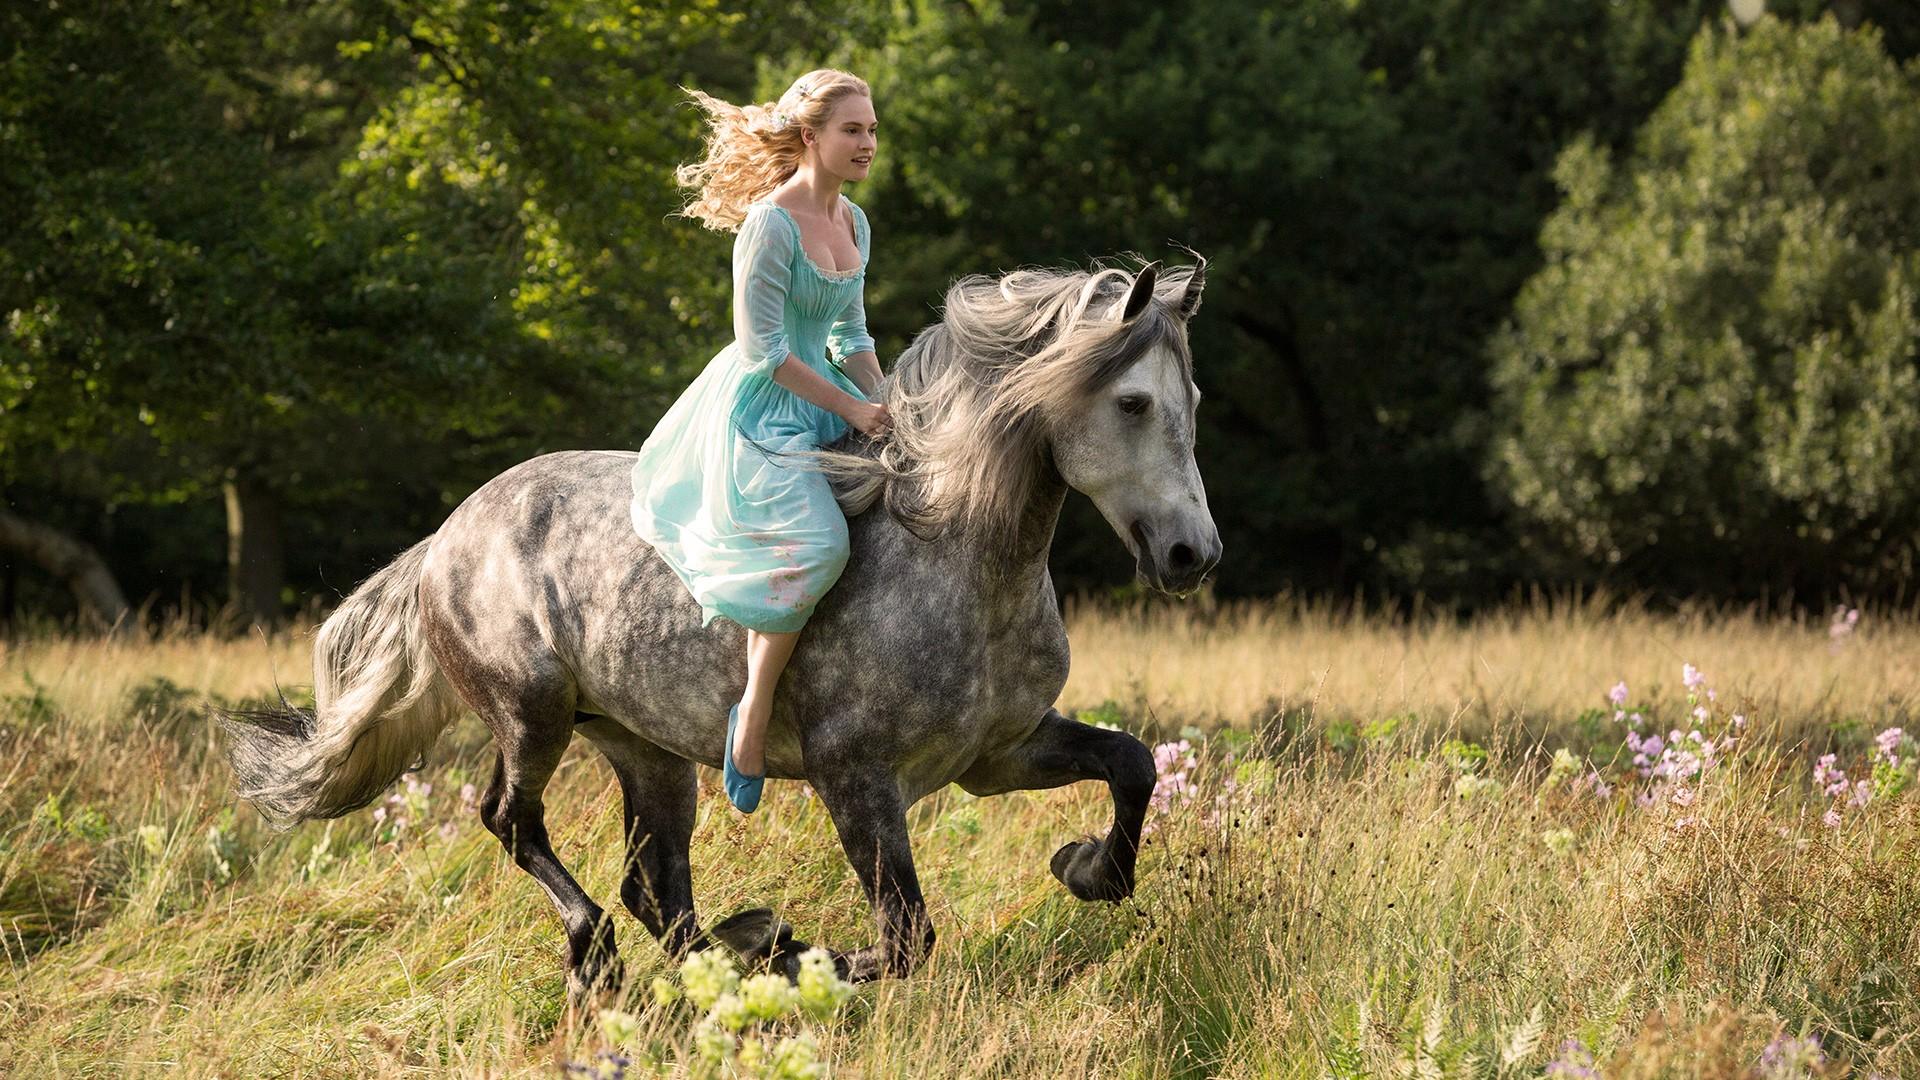 Lily James stars as Cinderella in Walt Disney Pictures' Cinderella (2015). Photo credit by Giles Keyte.